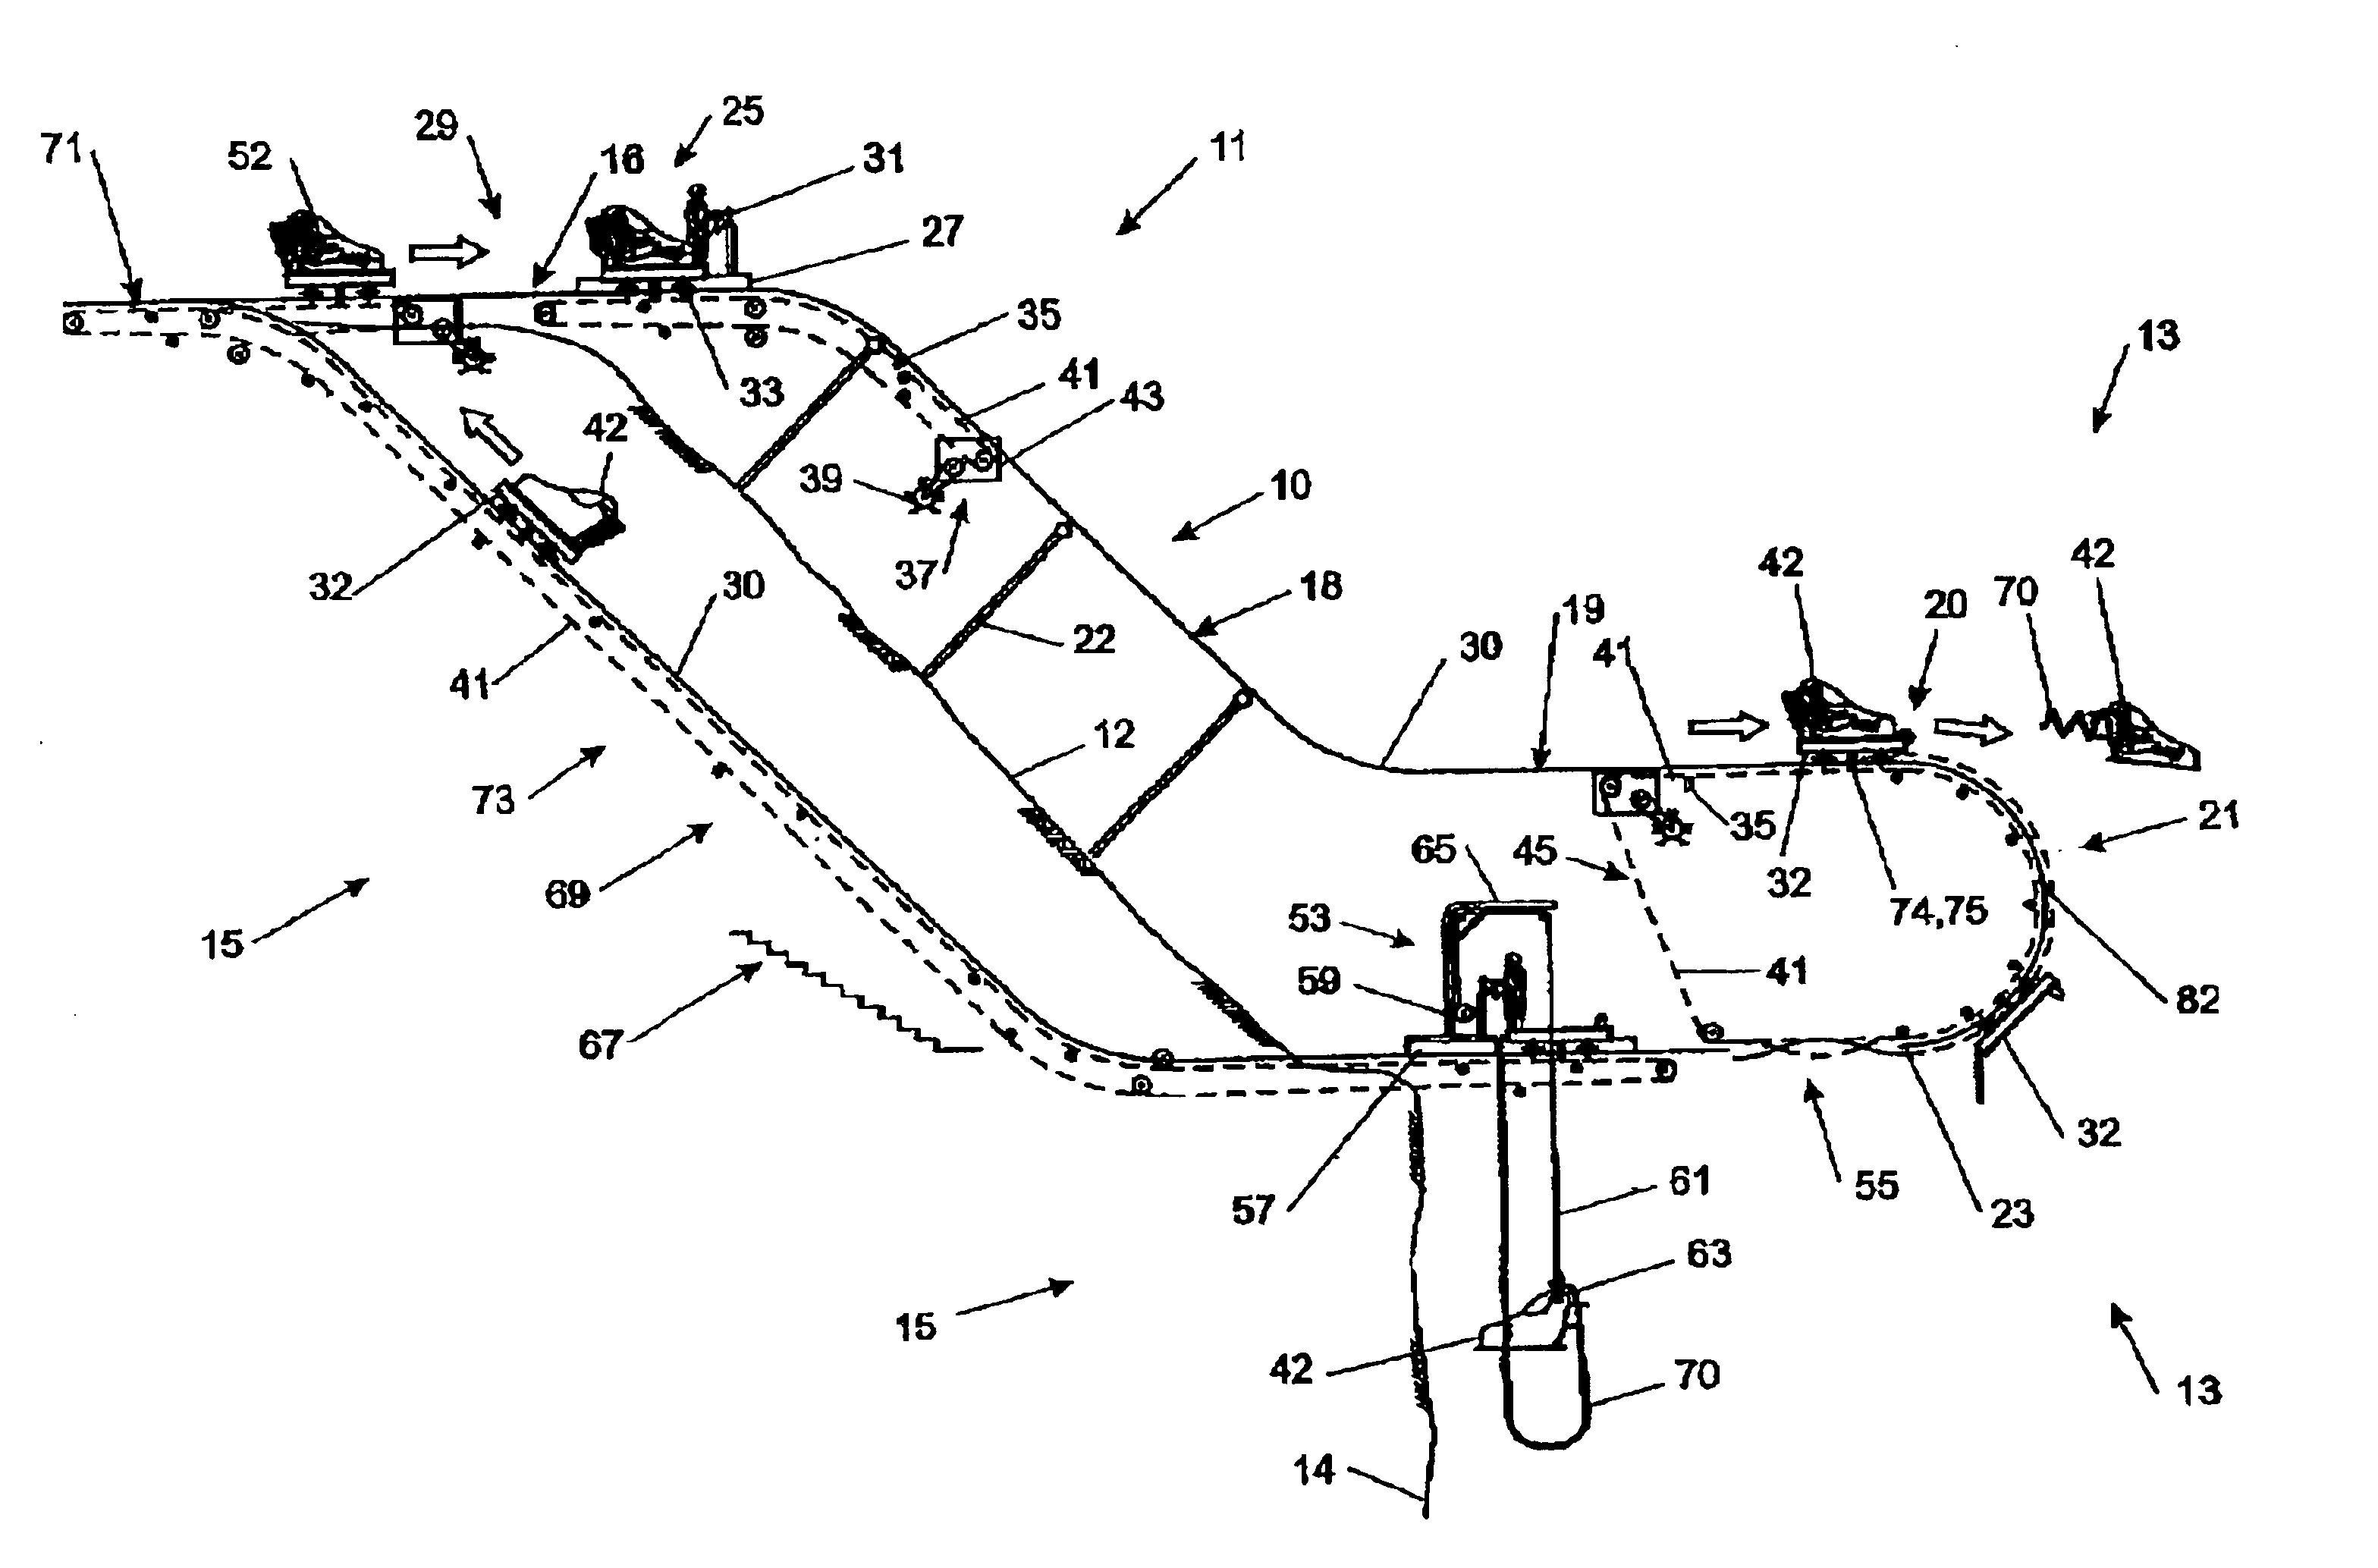 Apparatus for an amusement ride and fall